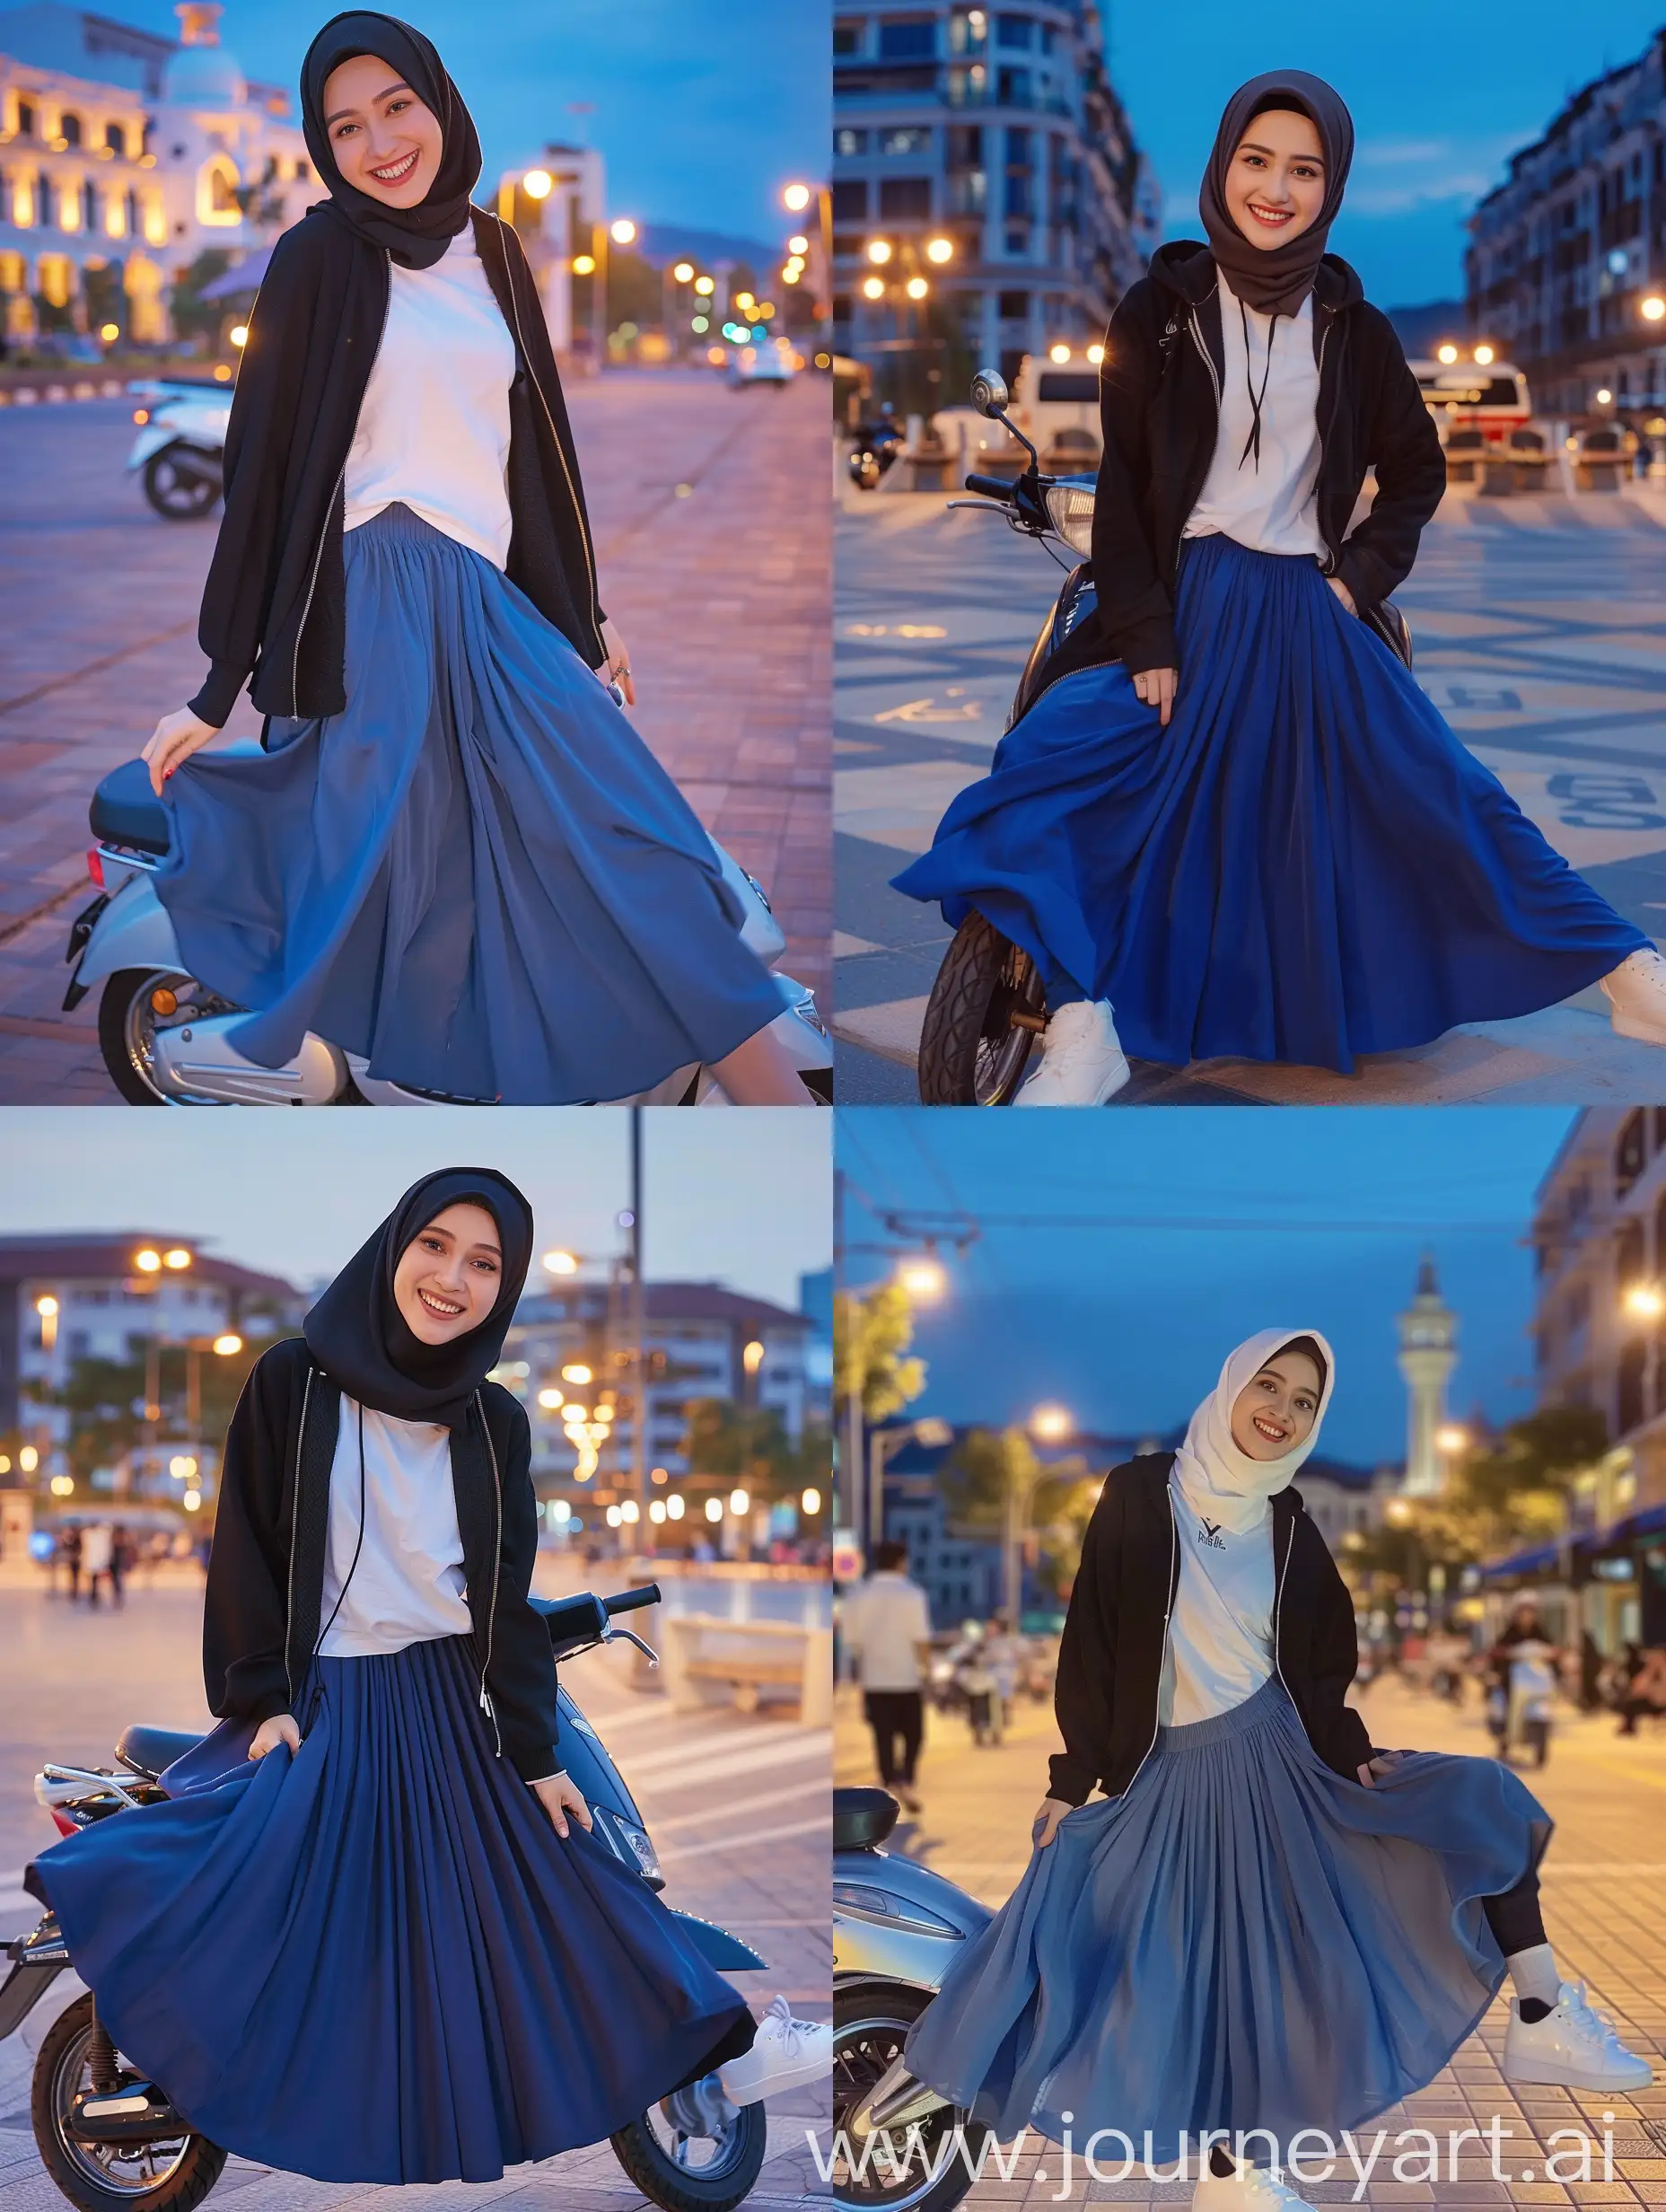  a 25-year-old Indonesian woman, wearing a hijab, a black hoodie with a zipper, wearing a white t-shirt, blue long skirt, white shoes, smiling and posing sweetly facing the camera,the background  is middle of the city square, evening atmosphere, sitting on top a scooter.